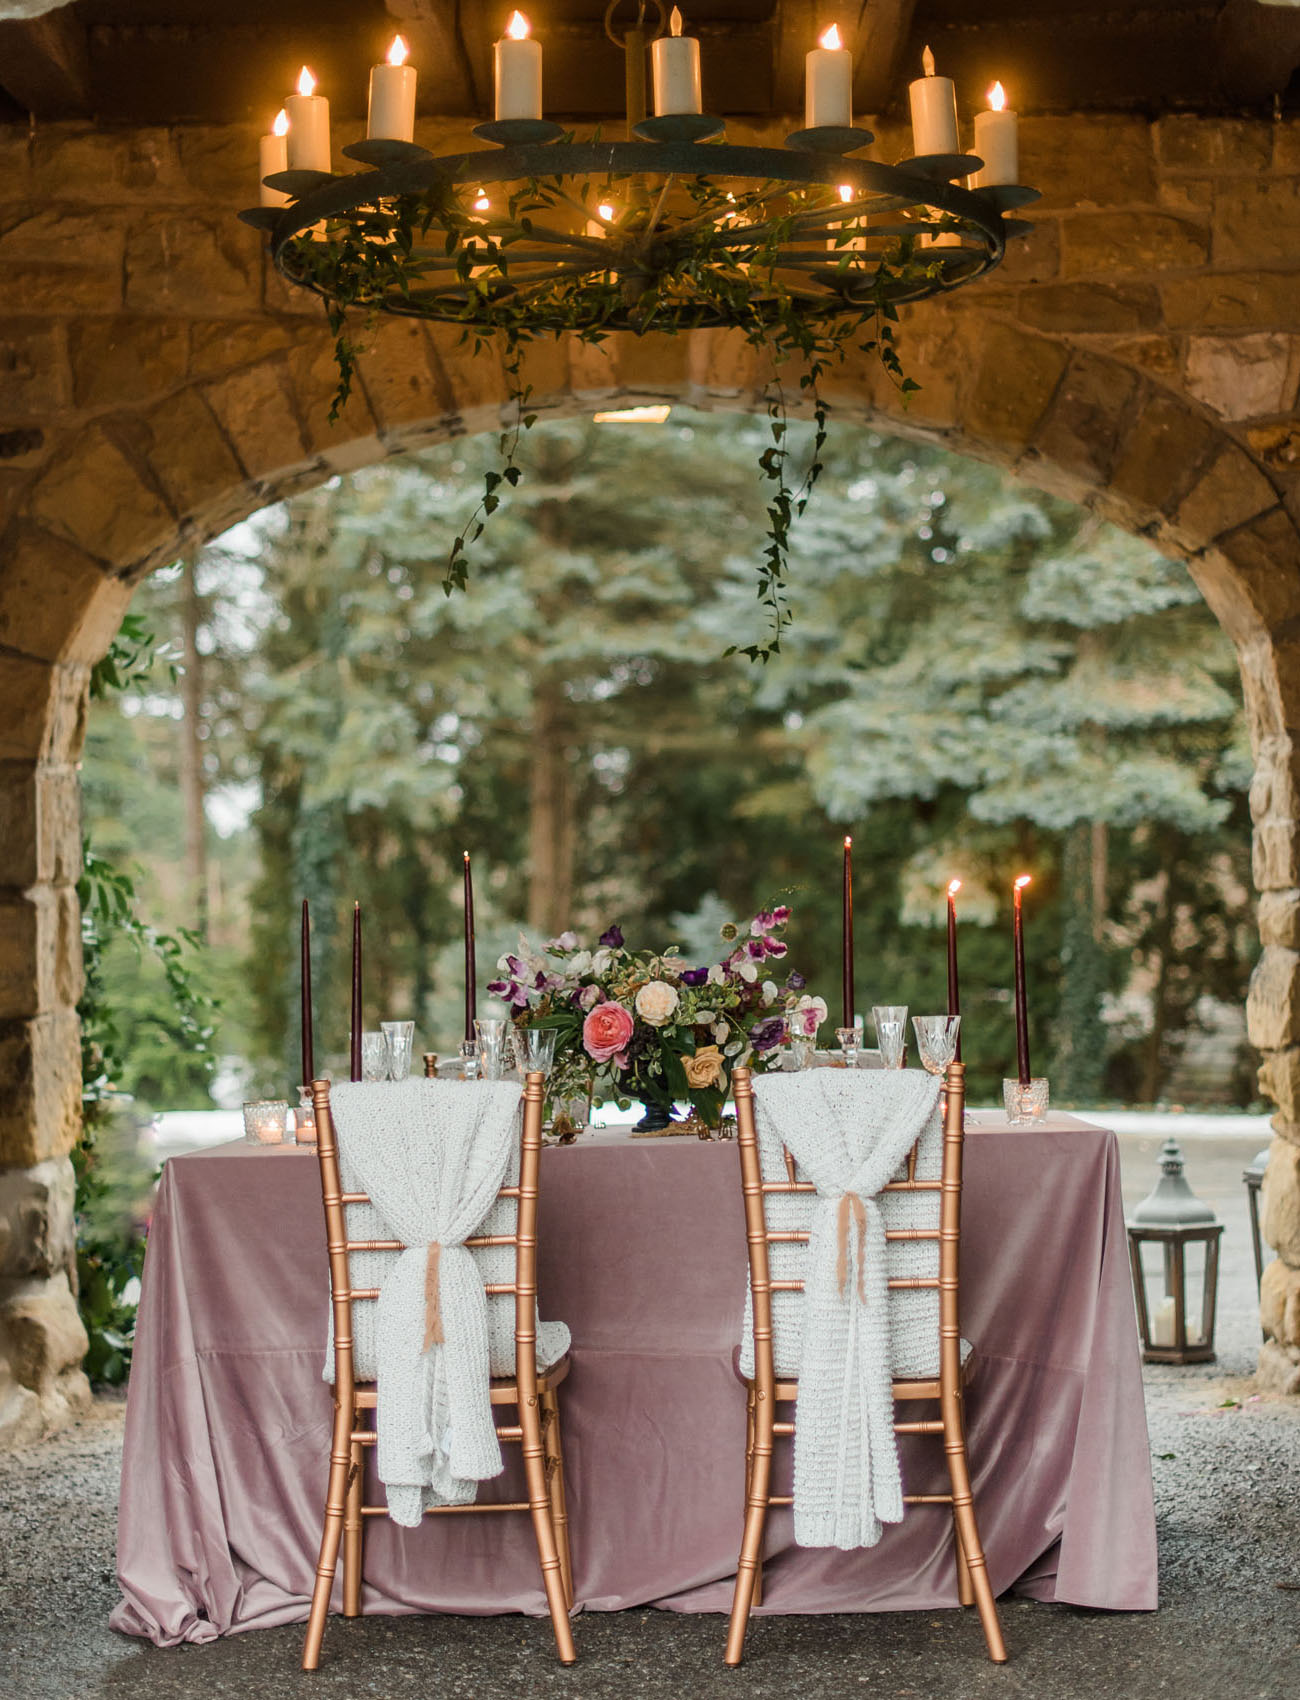 The dreamy reception was lit up with a chandelier and looked truly romantic